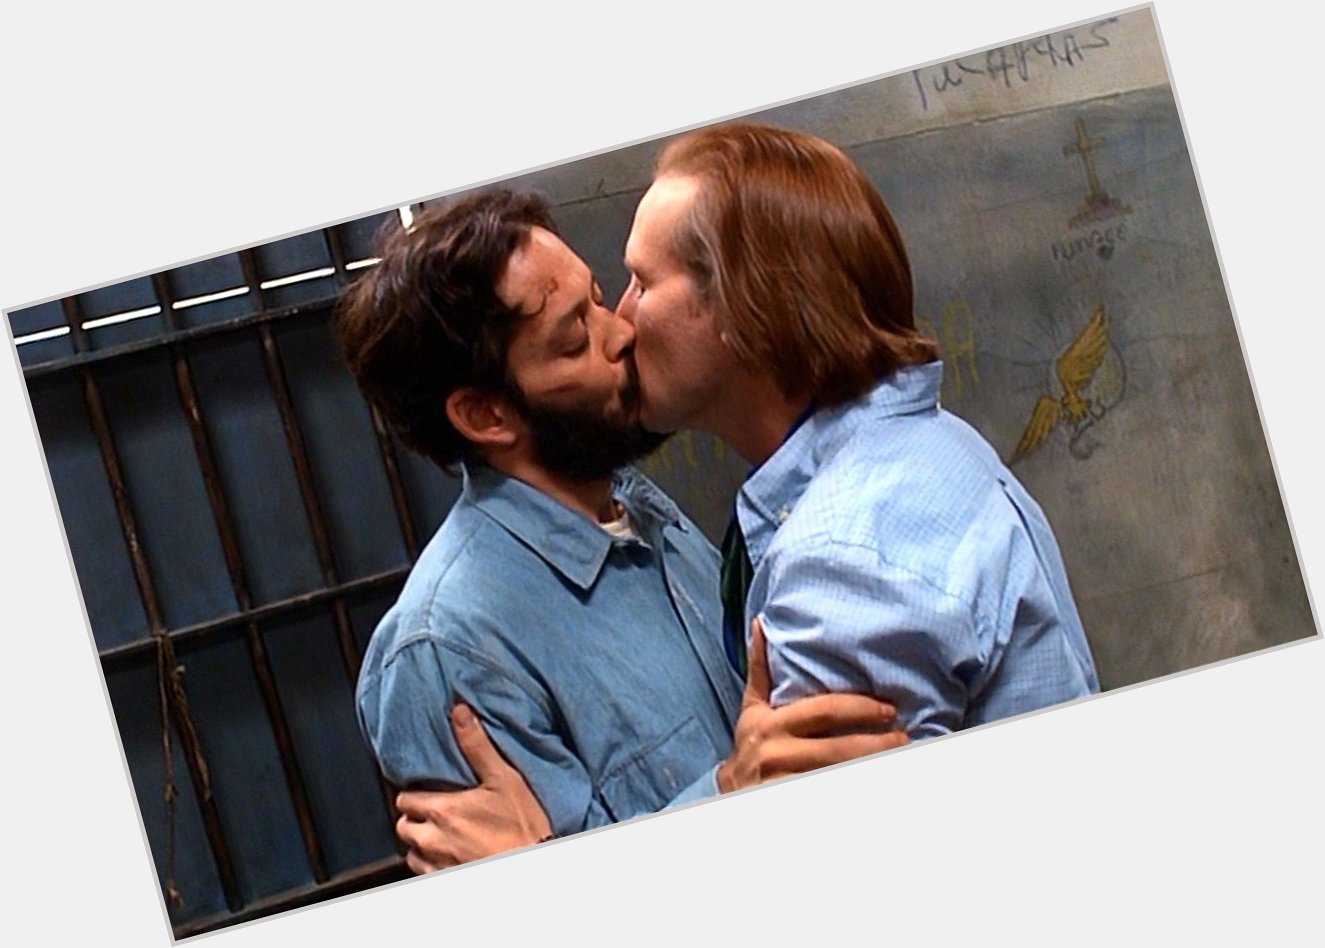 Happy birthday William Hurt, here kissing Raul Julia in my favorite film of theirs, Kiss of the Spider Woman. 